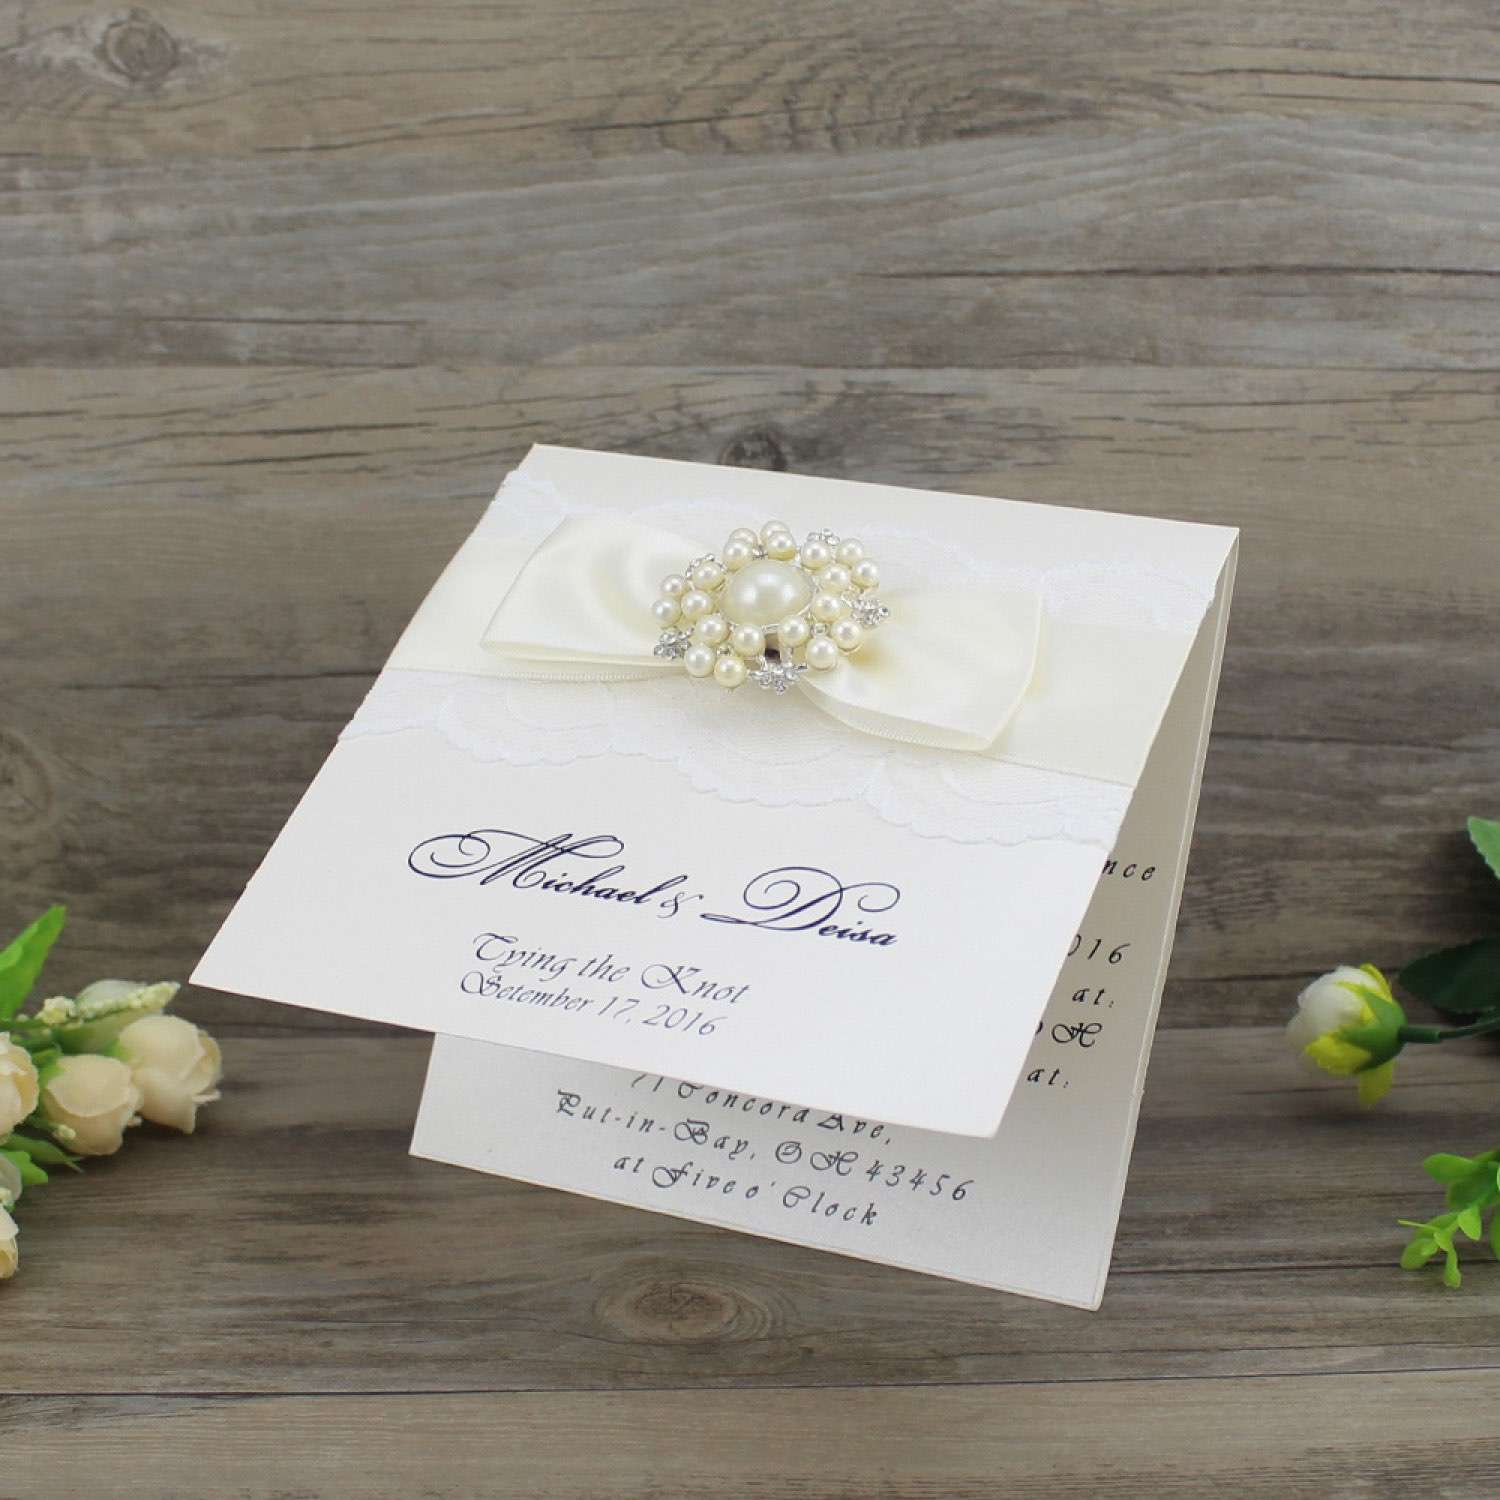 Lace Greeting Card Customized Half Fold Invitation with Buckle Decoration Wedding Invites Reception Card 